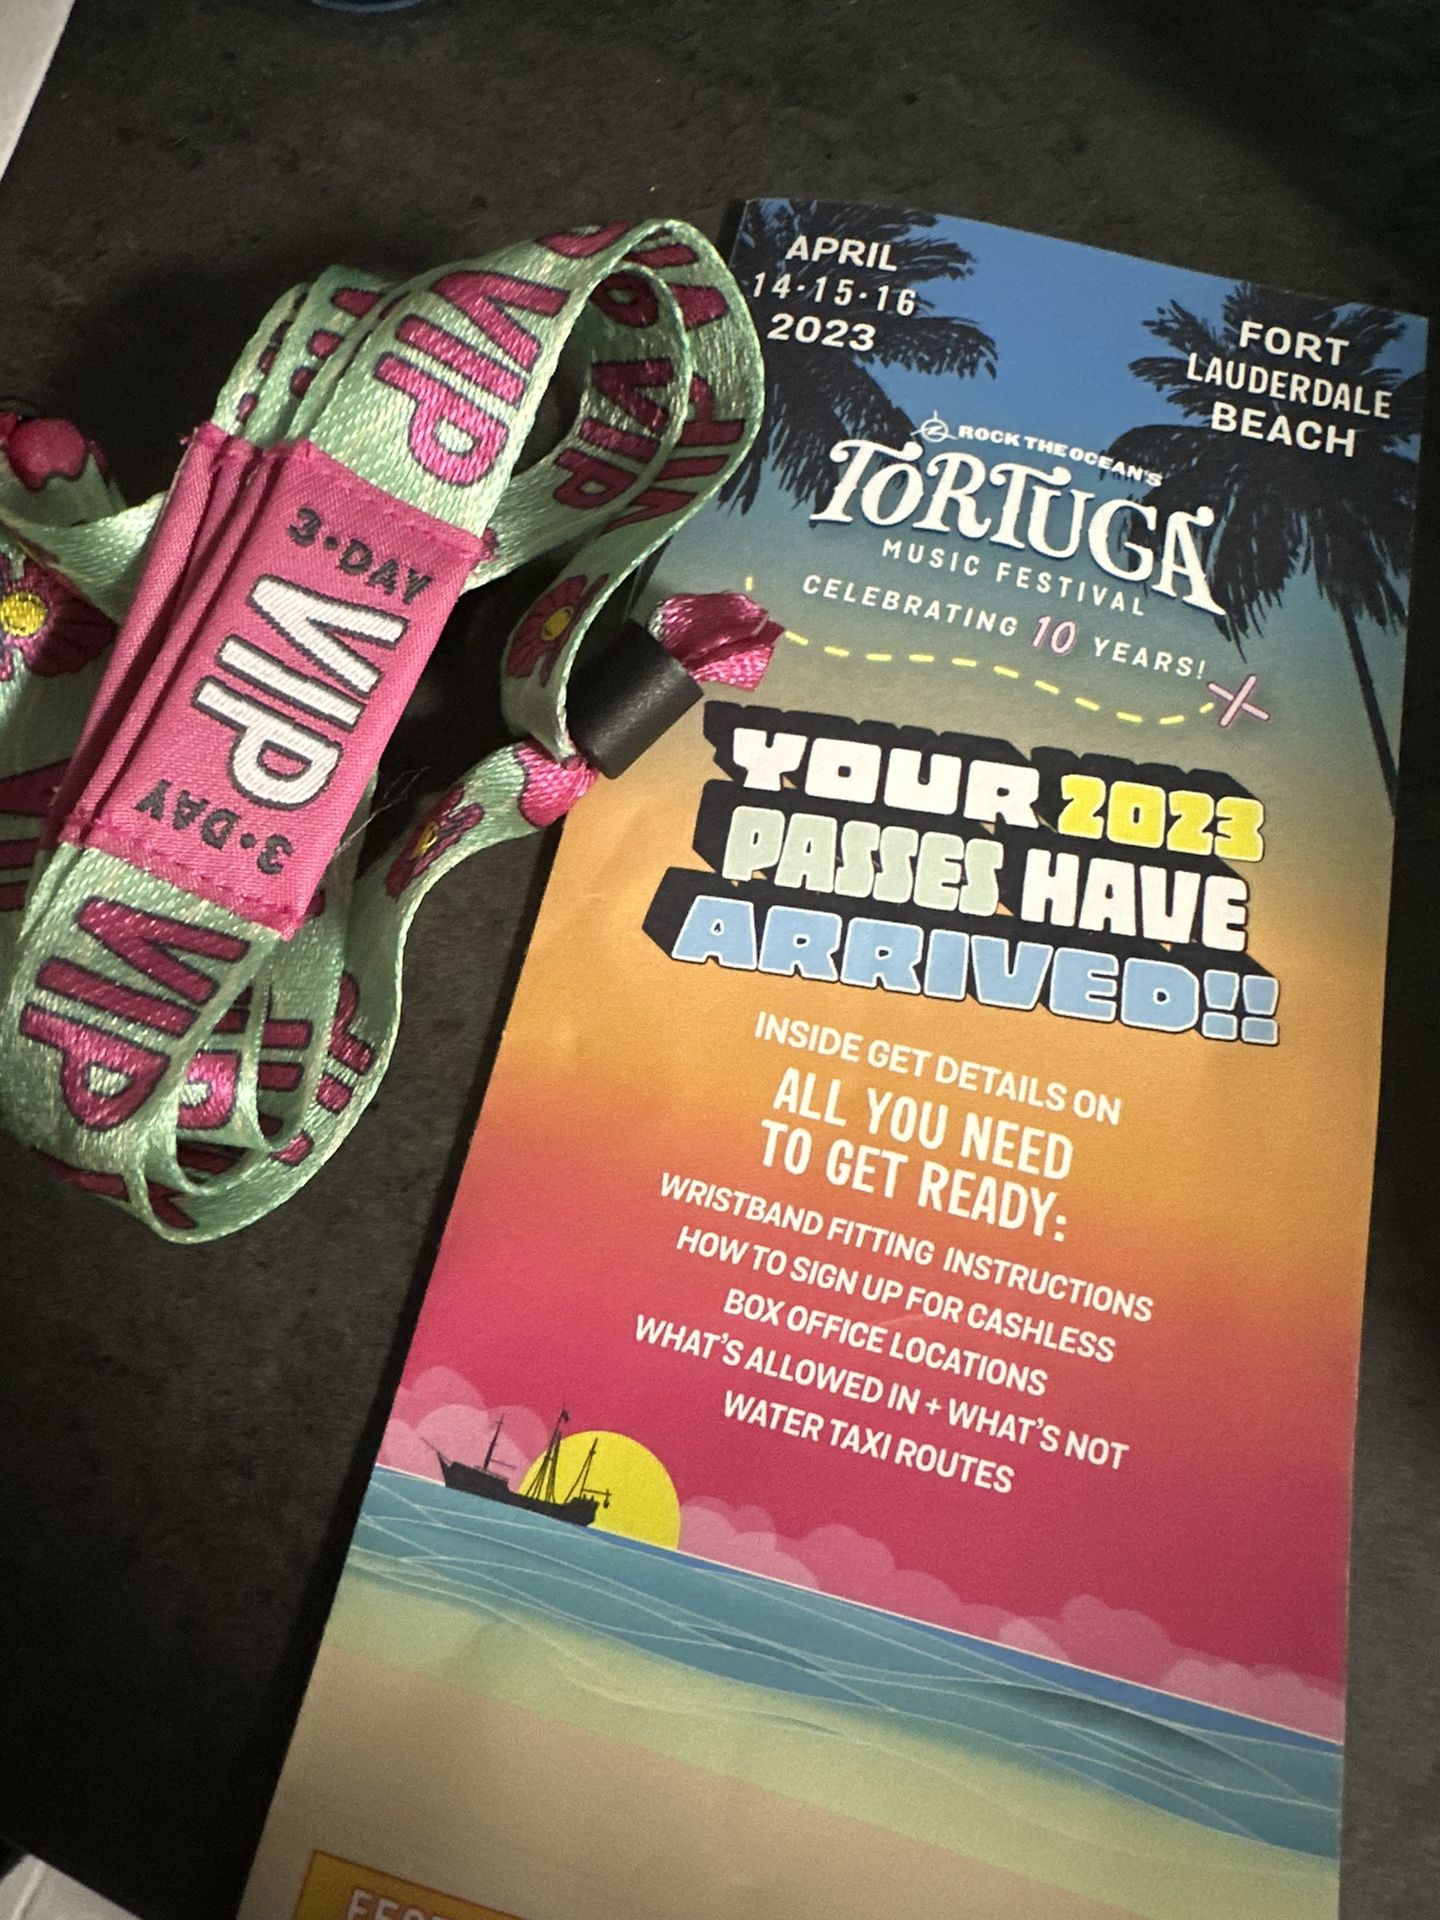 Two Tortuga Vip Tickets